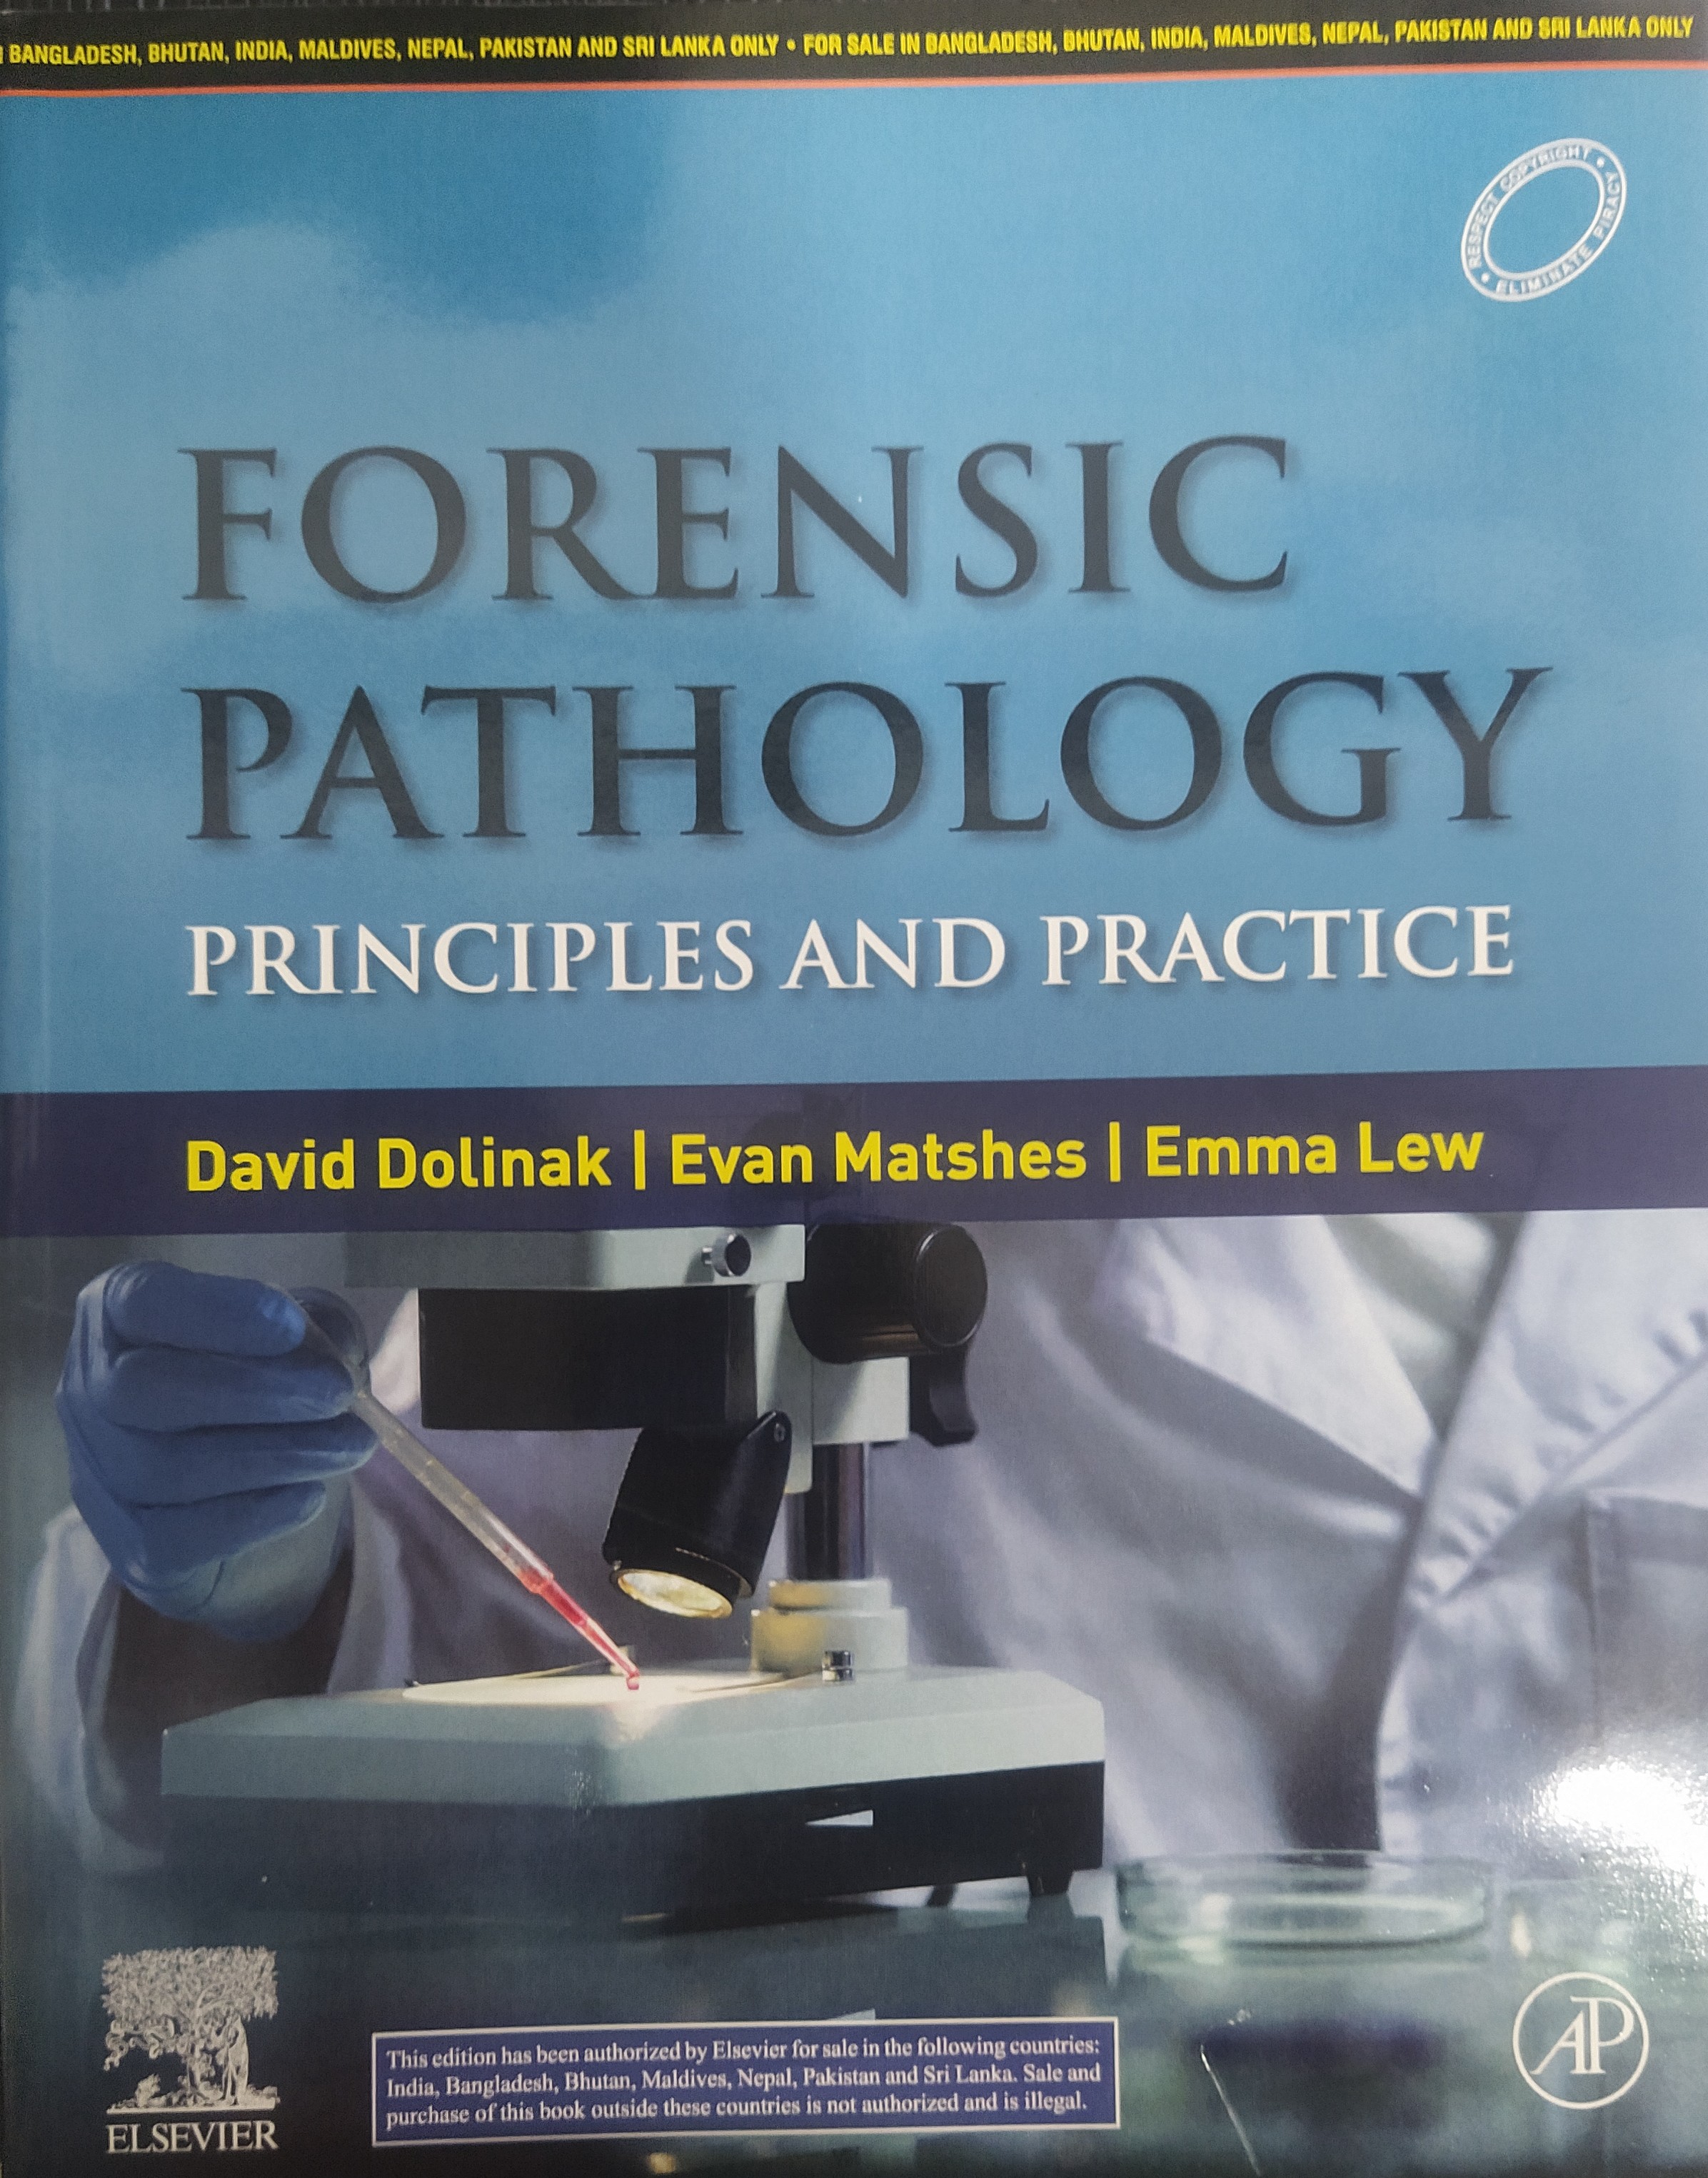 exclusive-publishers/elsevier/forensic-pathology:-principles-&-practice-9780122199516